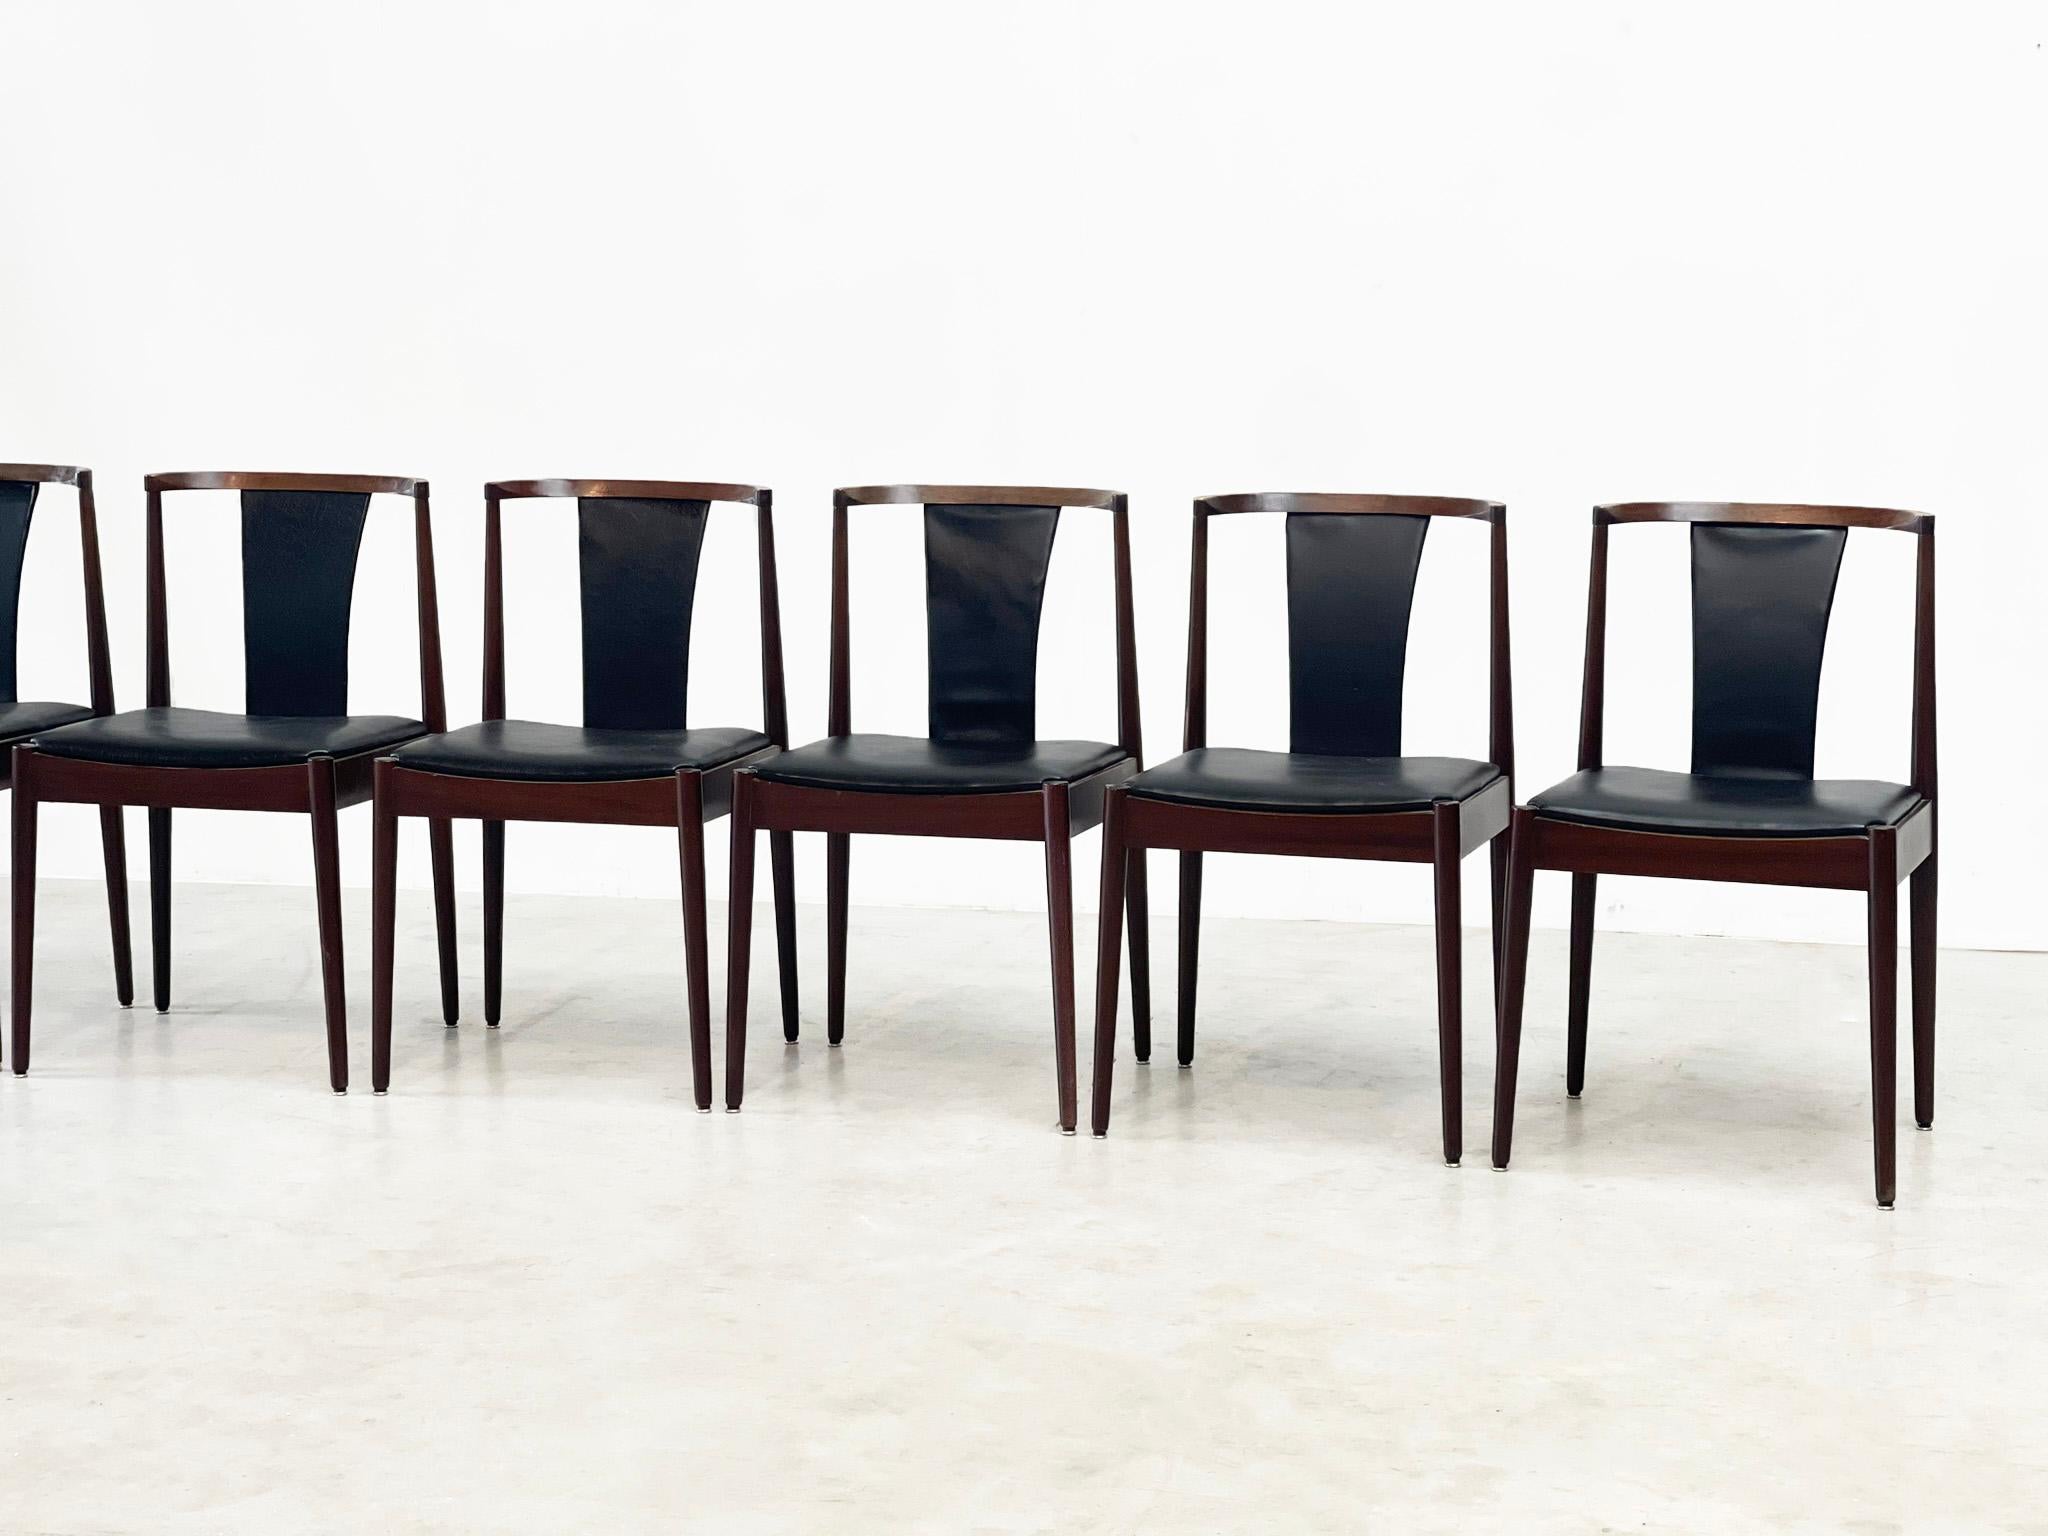 Leather Casala dining chairs
Nice timeless dining chairs. 
These dining chairs are made by the famous brand Casala. They were designed in the 80s by someone unknown but they certainly have a nice shape and are of high quality! 

